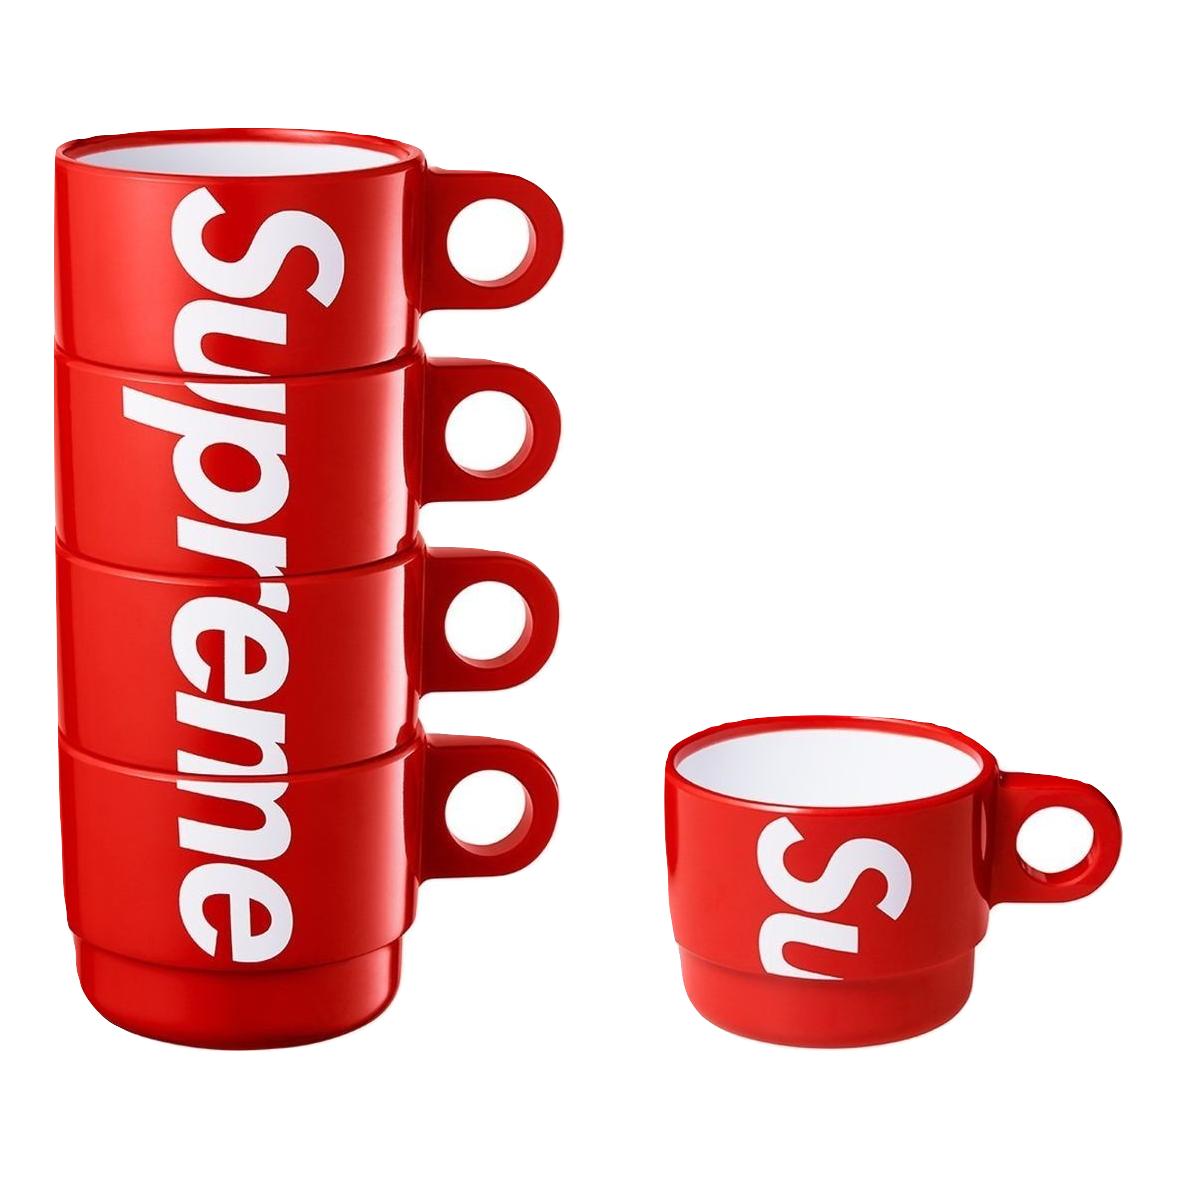 Supreme Stacking Cups (Set of 4) - Red - Used